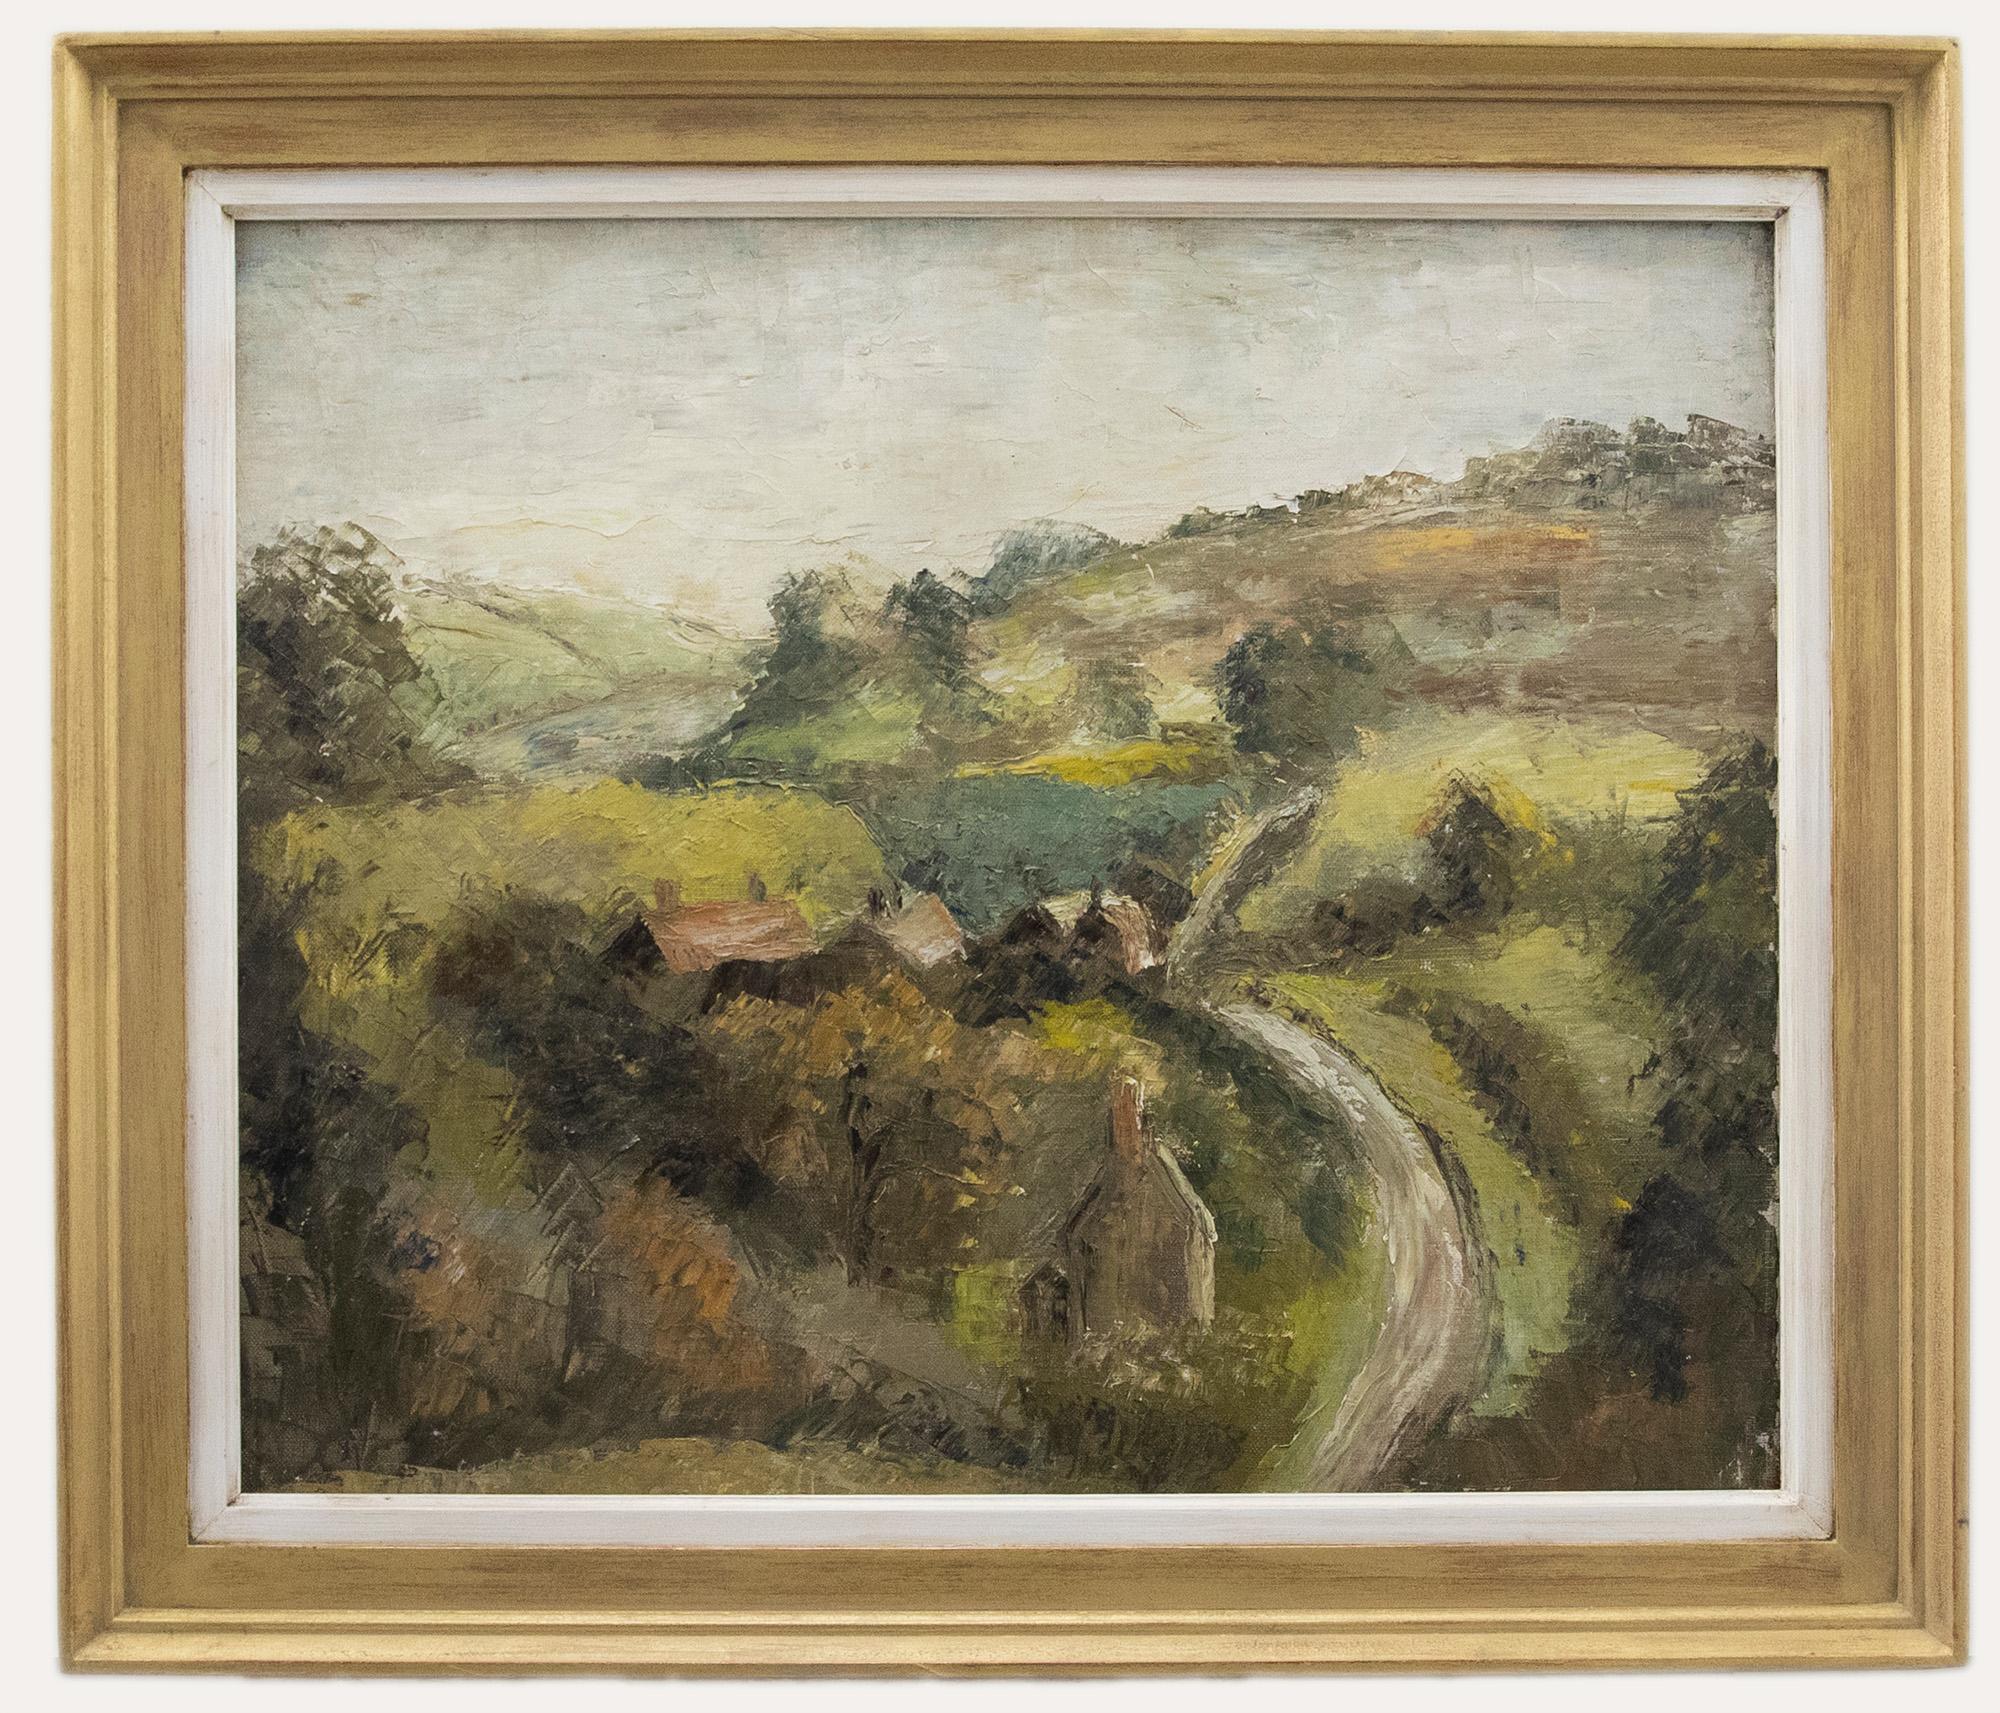 Unknown Landscape Painting - Manner of Kyffin Williams - Framed 20th Century Oil, Valley Landscape